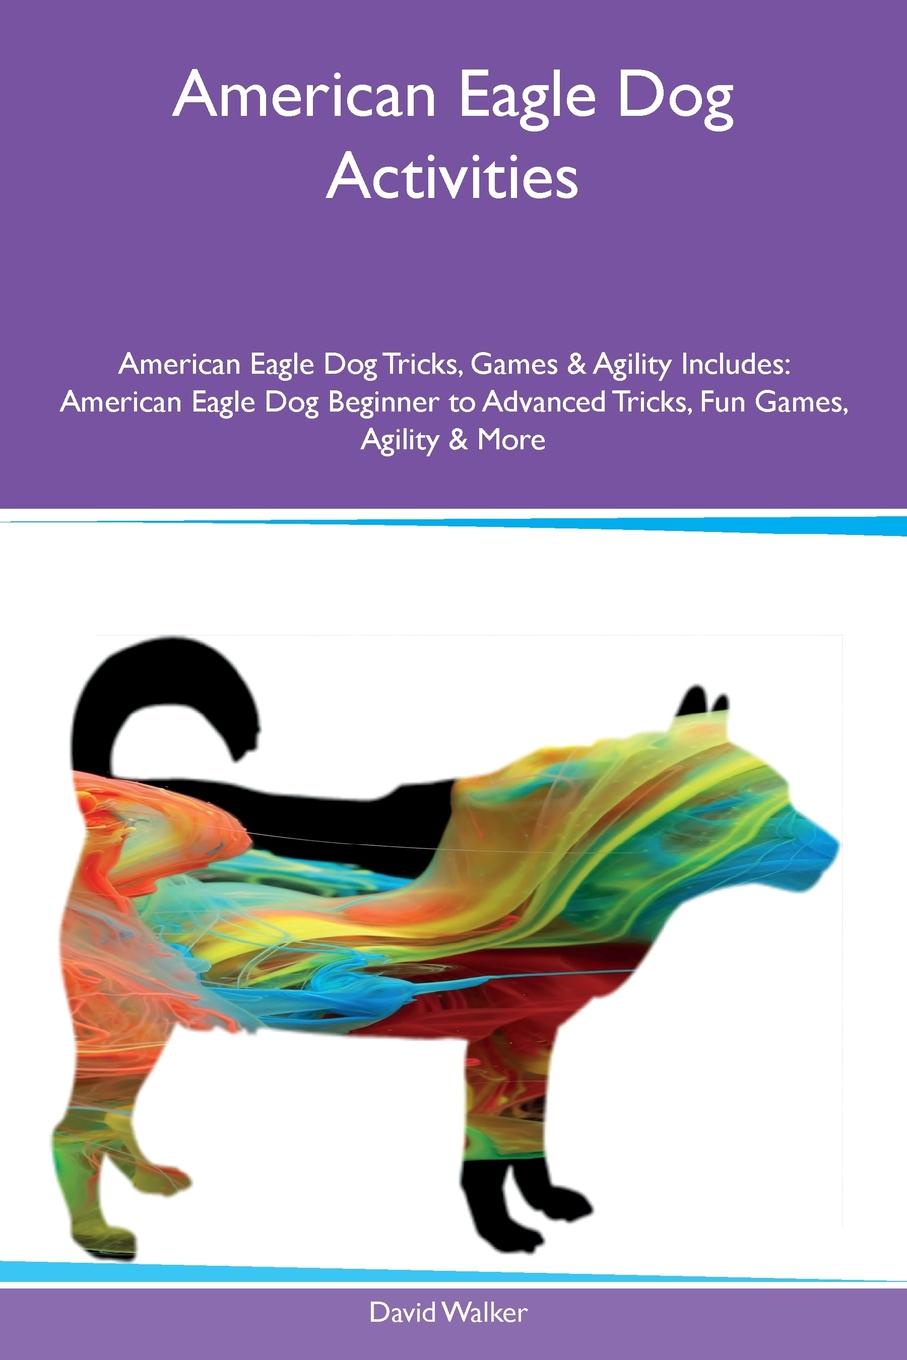 American Eagle Dog Activities American Eagle Dog Tricks, Games & Agility Includes. American Eagle Dog Beginner to Advanced Tricks, Fun Games, Agility & More